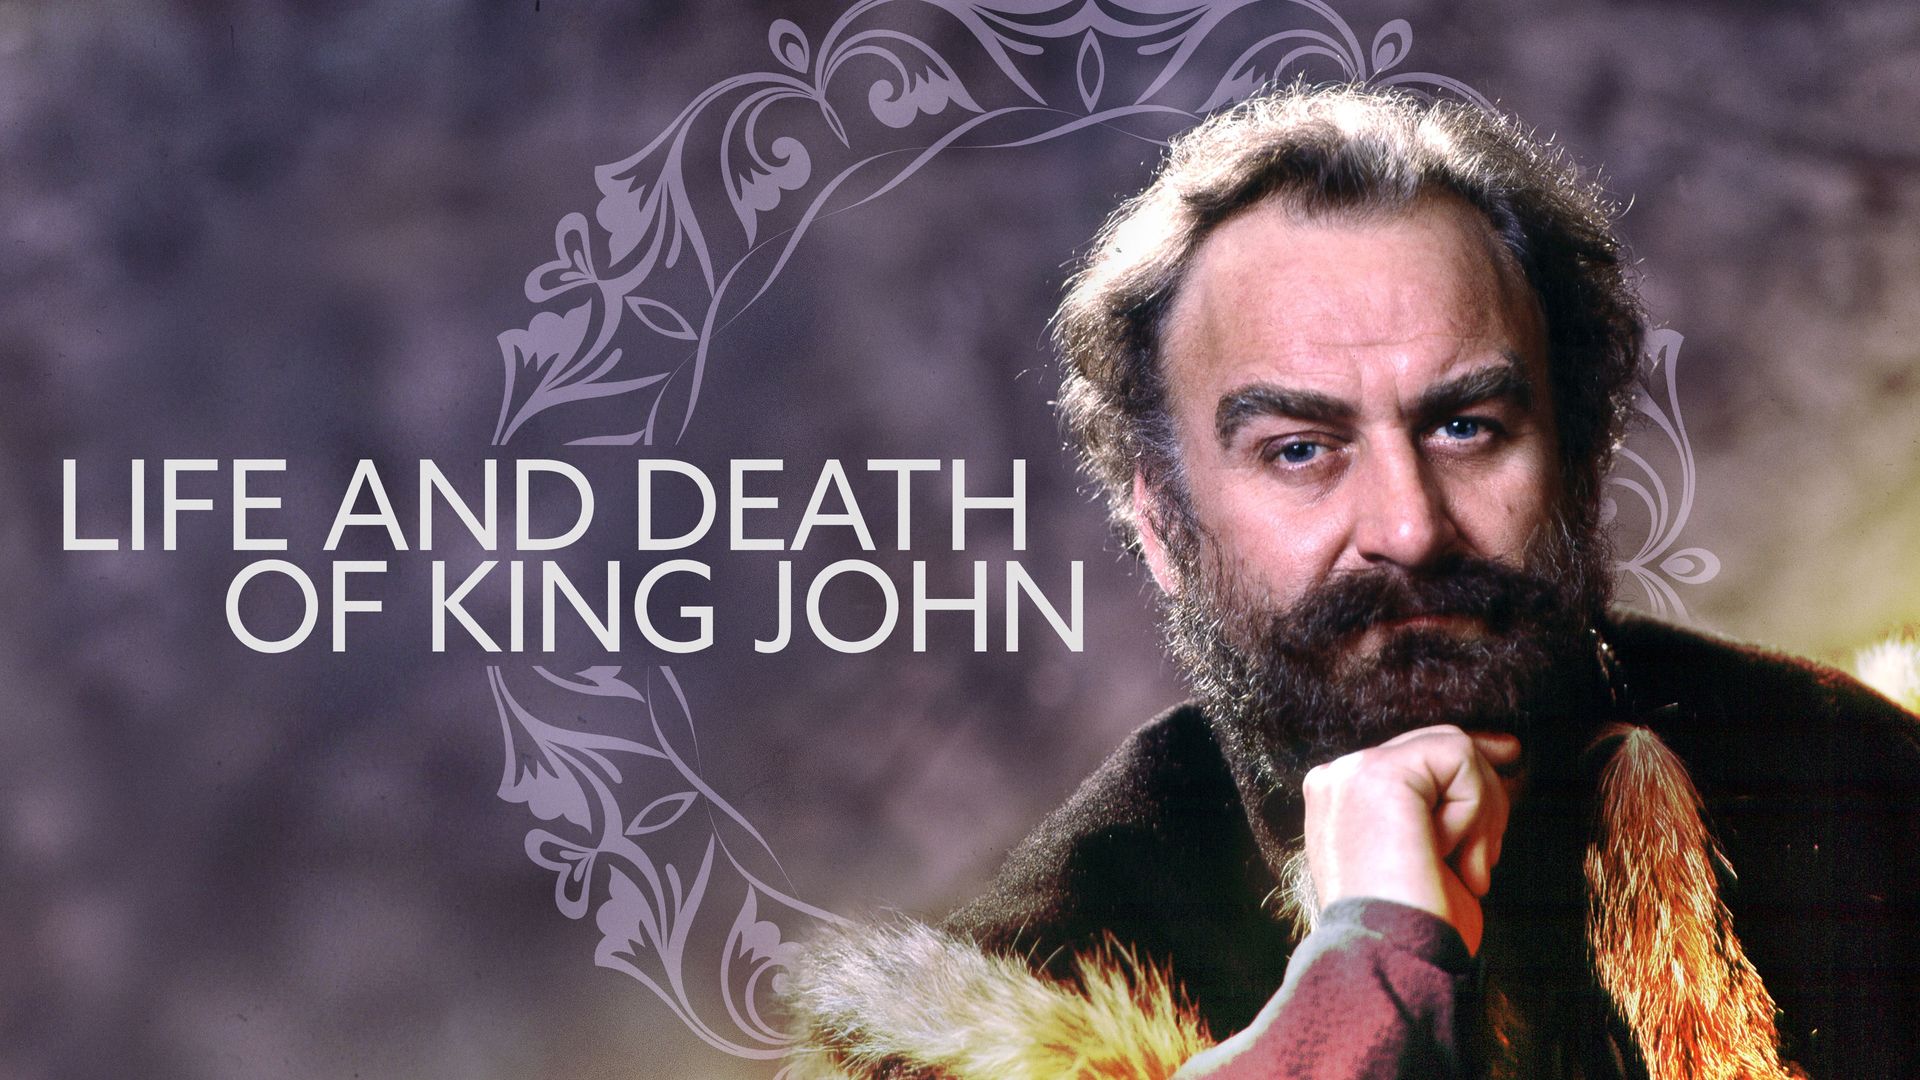 The Life and Death of King John Backdrop